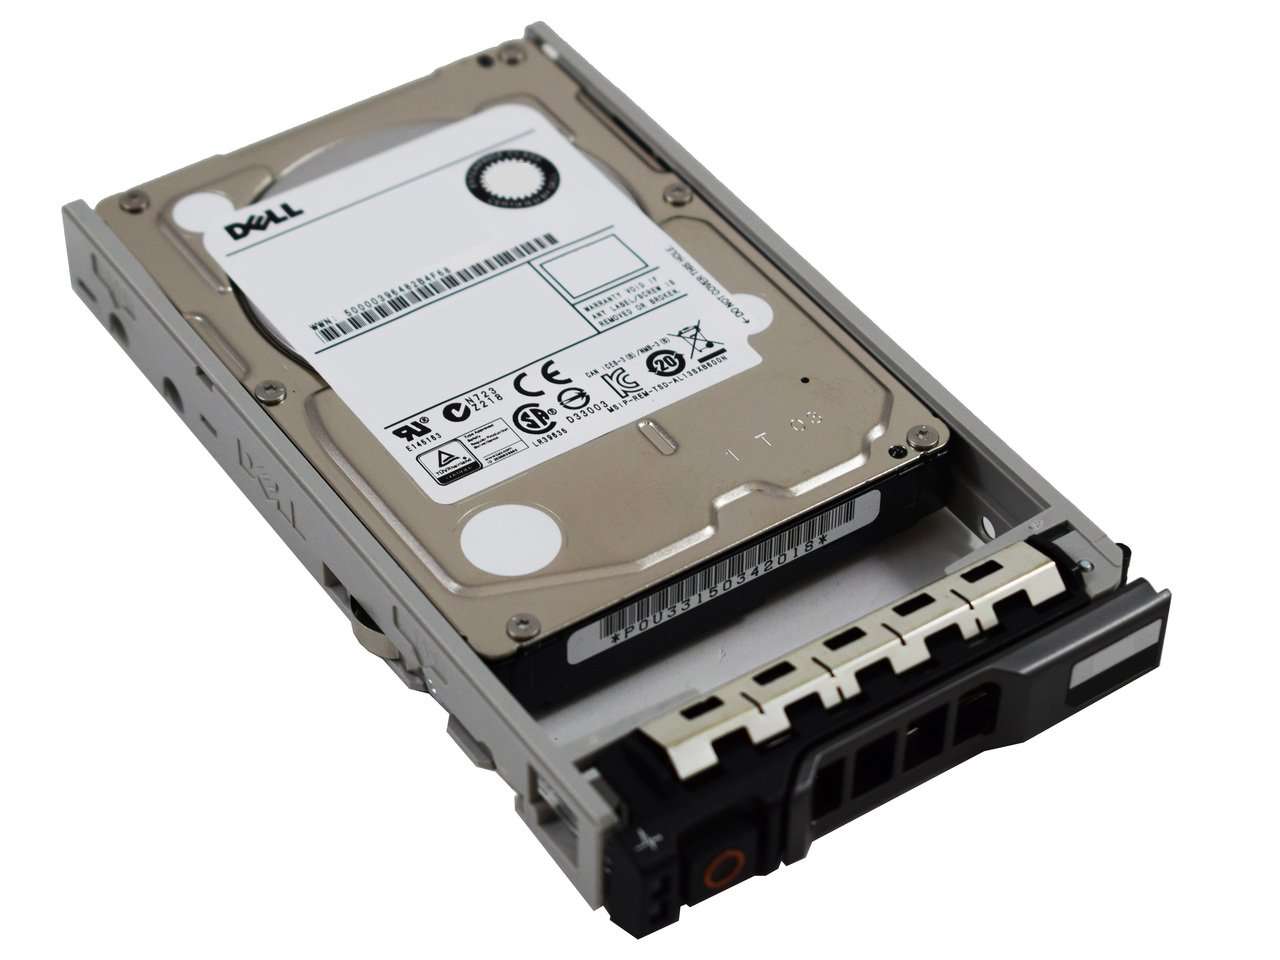 Dell G13 342-3027 600GB 10K RPM SAS 6Gb/s 512n 2.5" Manufacturer Recertified HDD